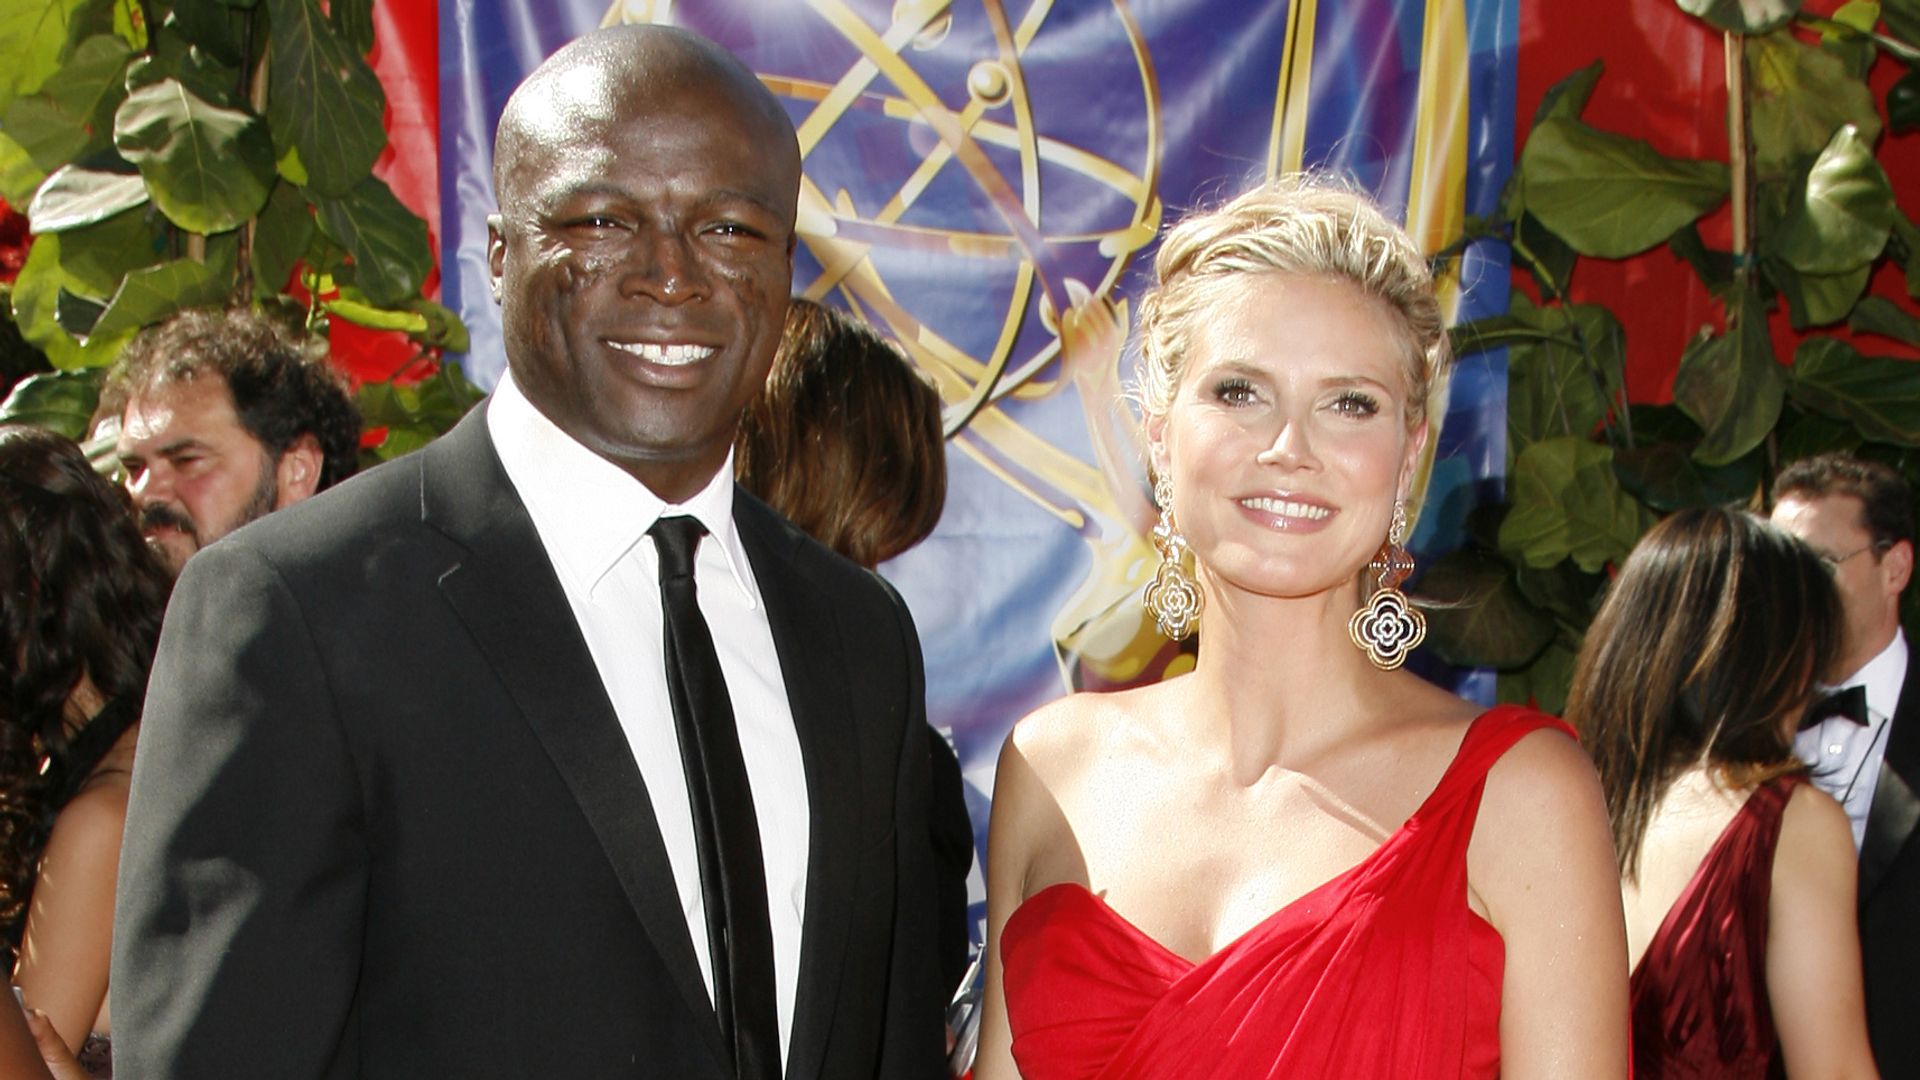 Seal and Heidi Klum smiling together on the Emmys red carpet